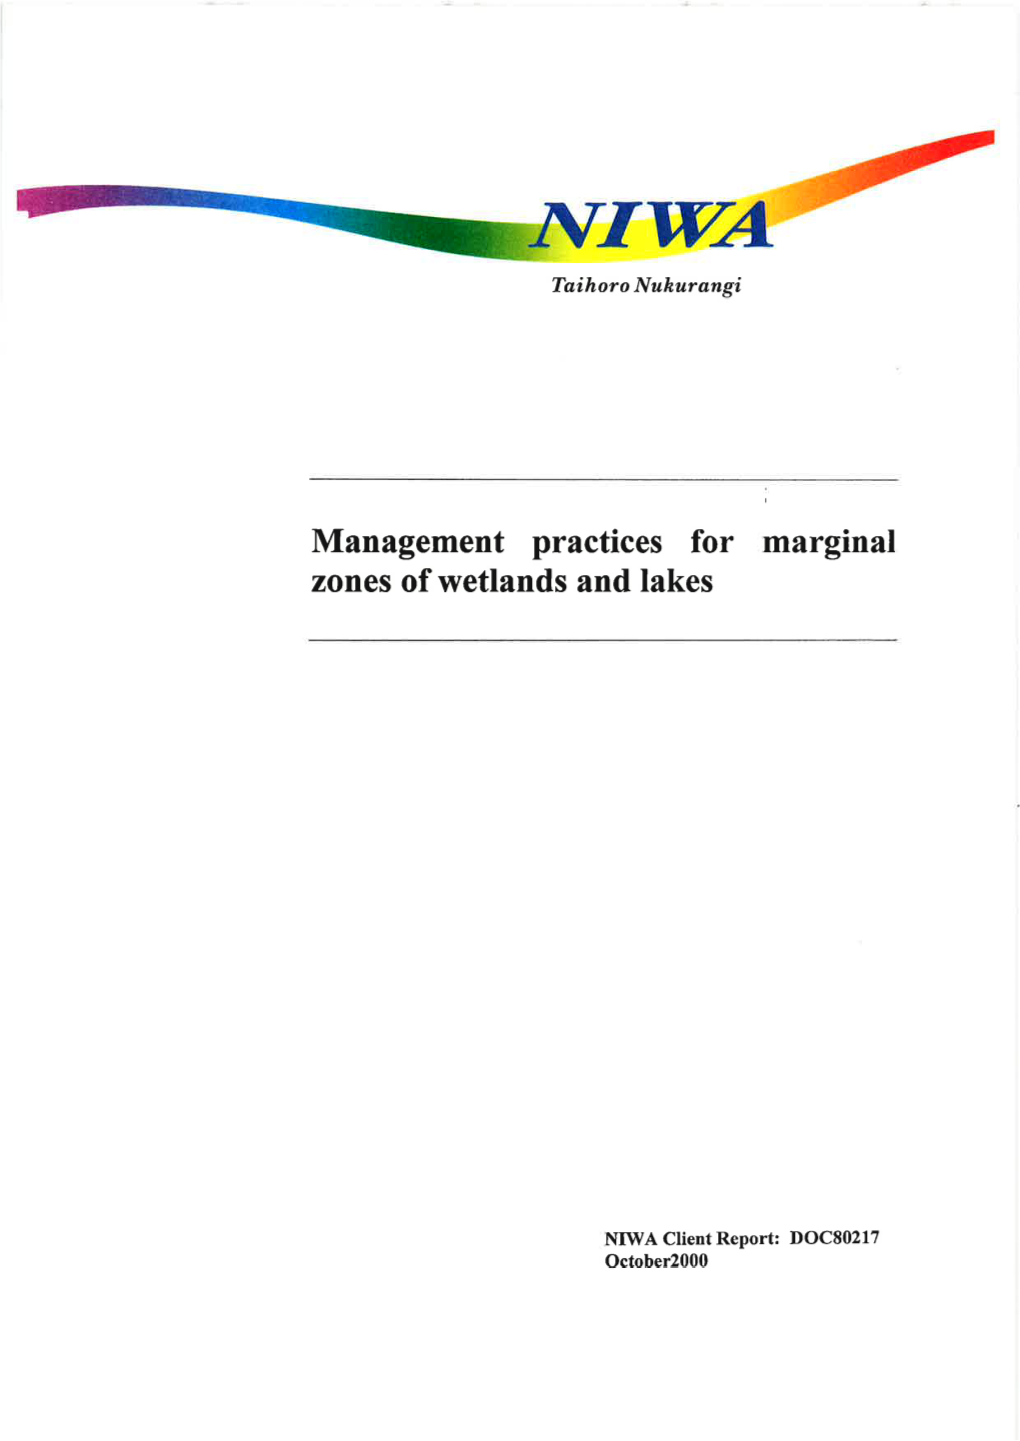 Management Practices for Marginal Zones of Wetlands and Lakes